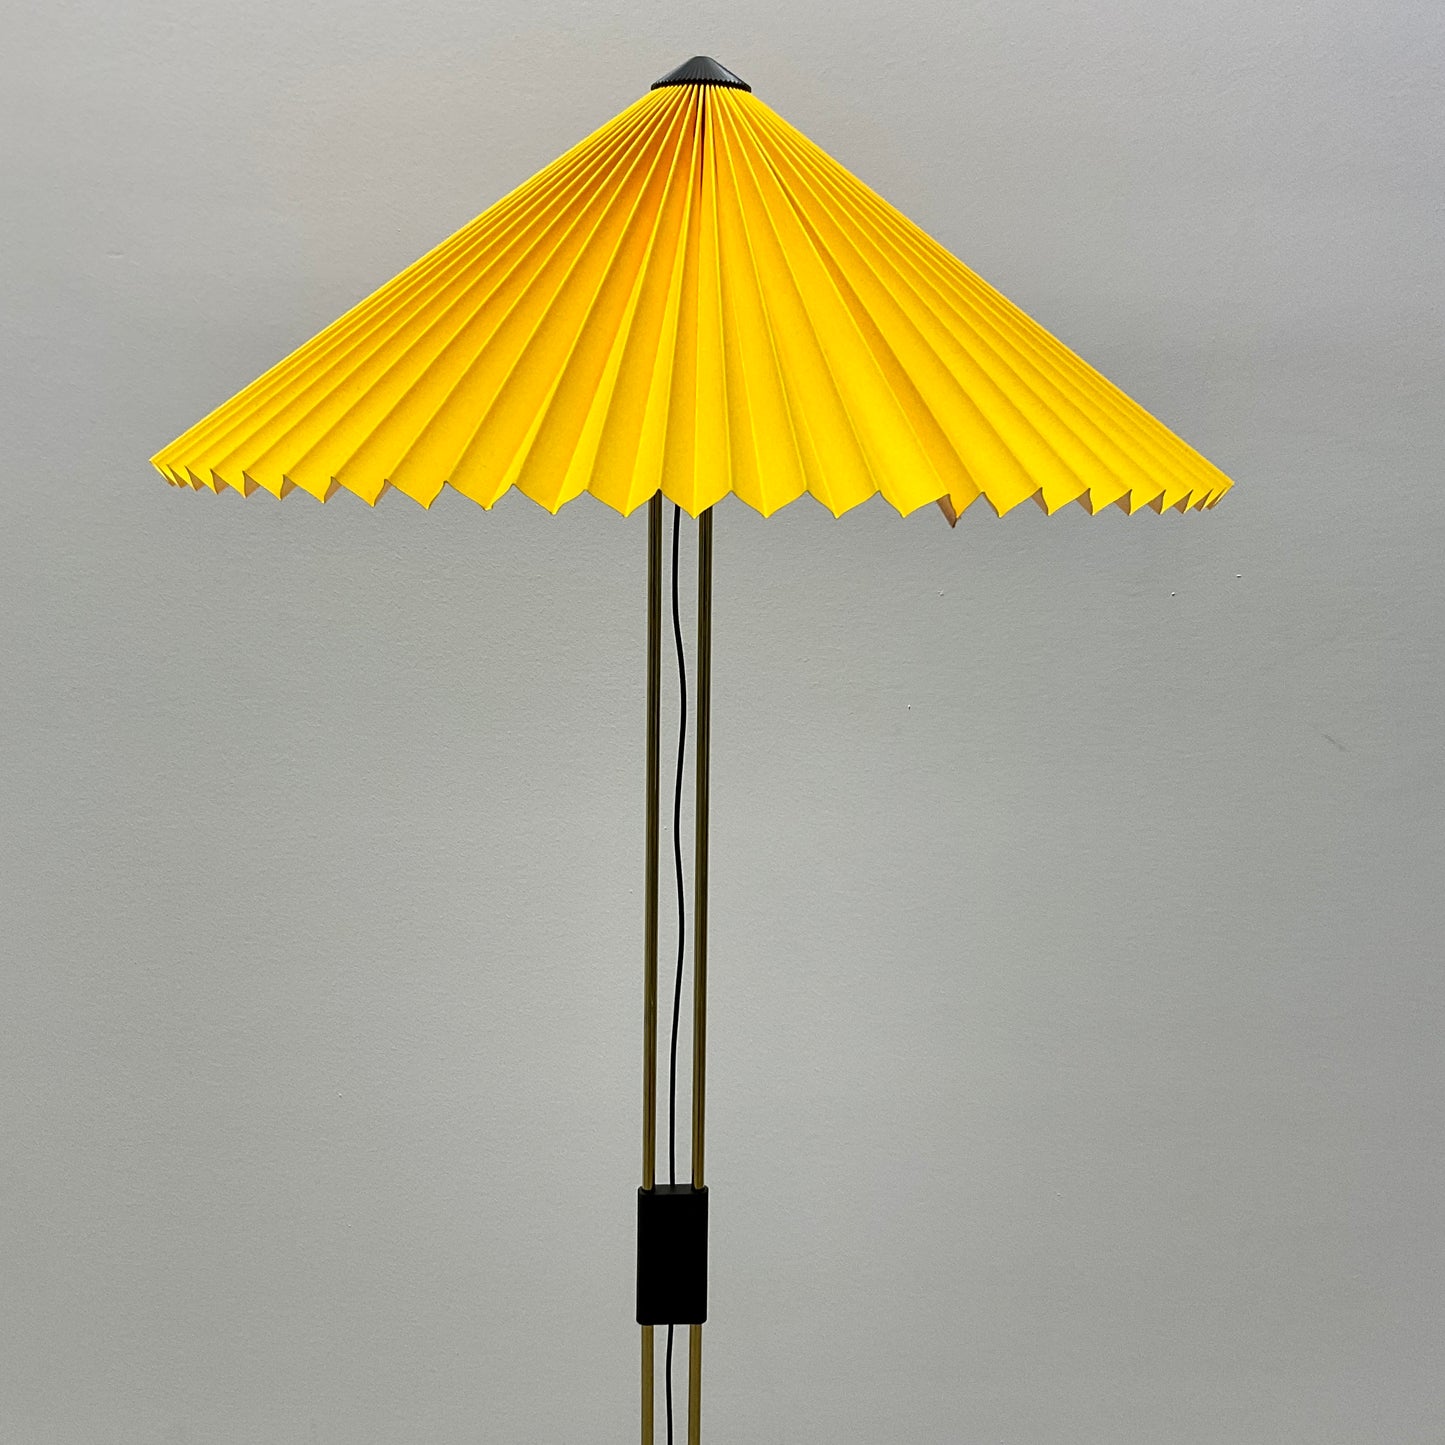 Load image into Gallery viewer, Matin Floor Lamp by Inga Sempé for Hay
